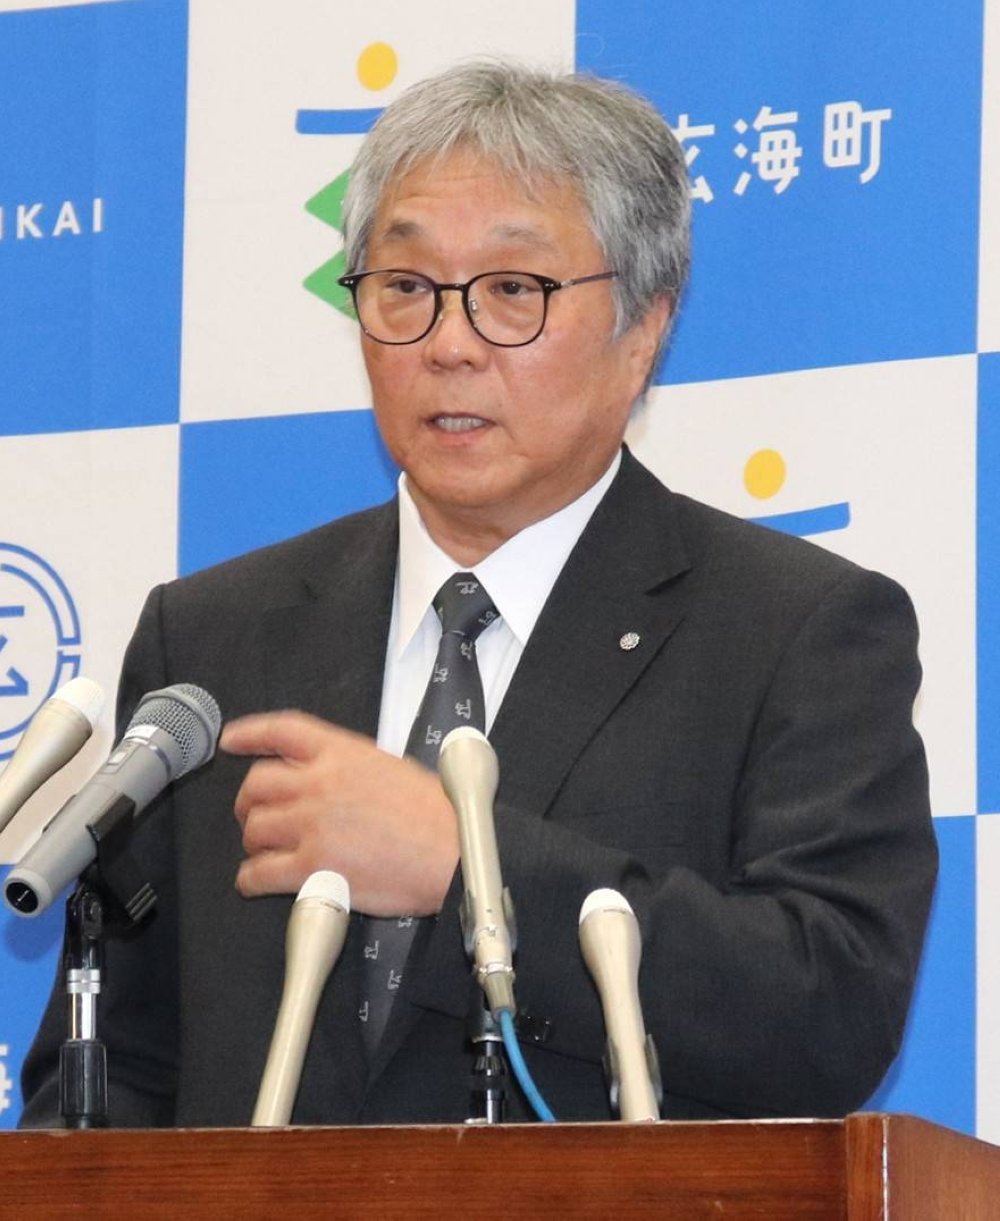 The mayor of Genkai decides to accept the investigation into nuclear waste sites